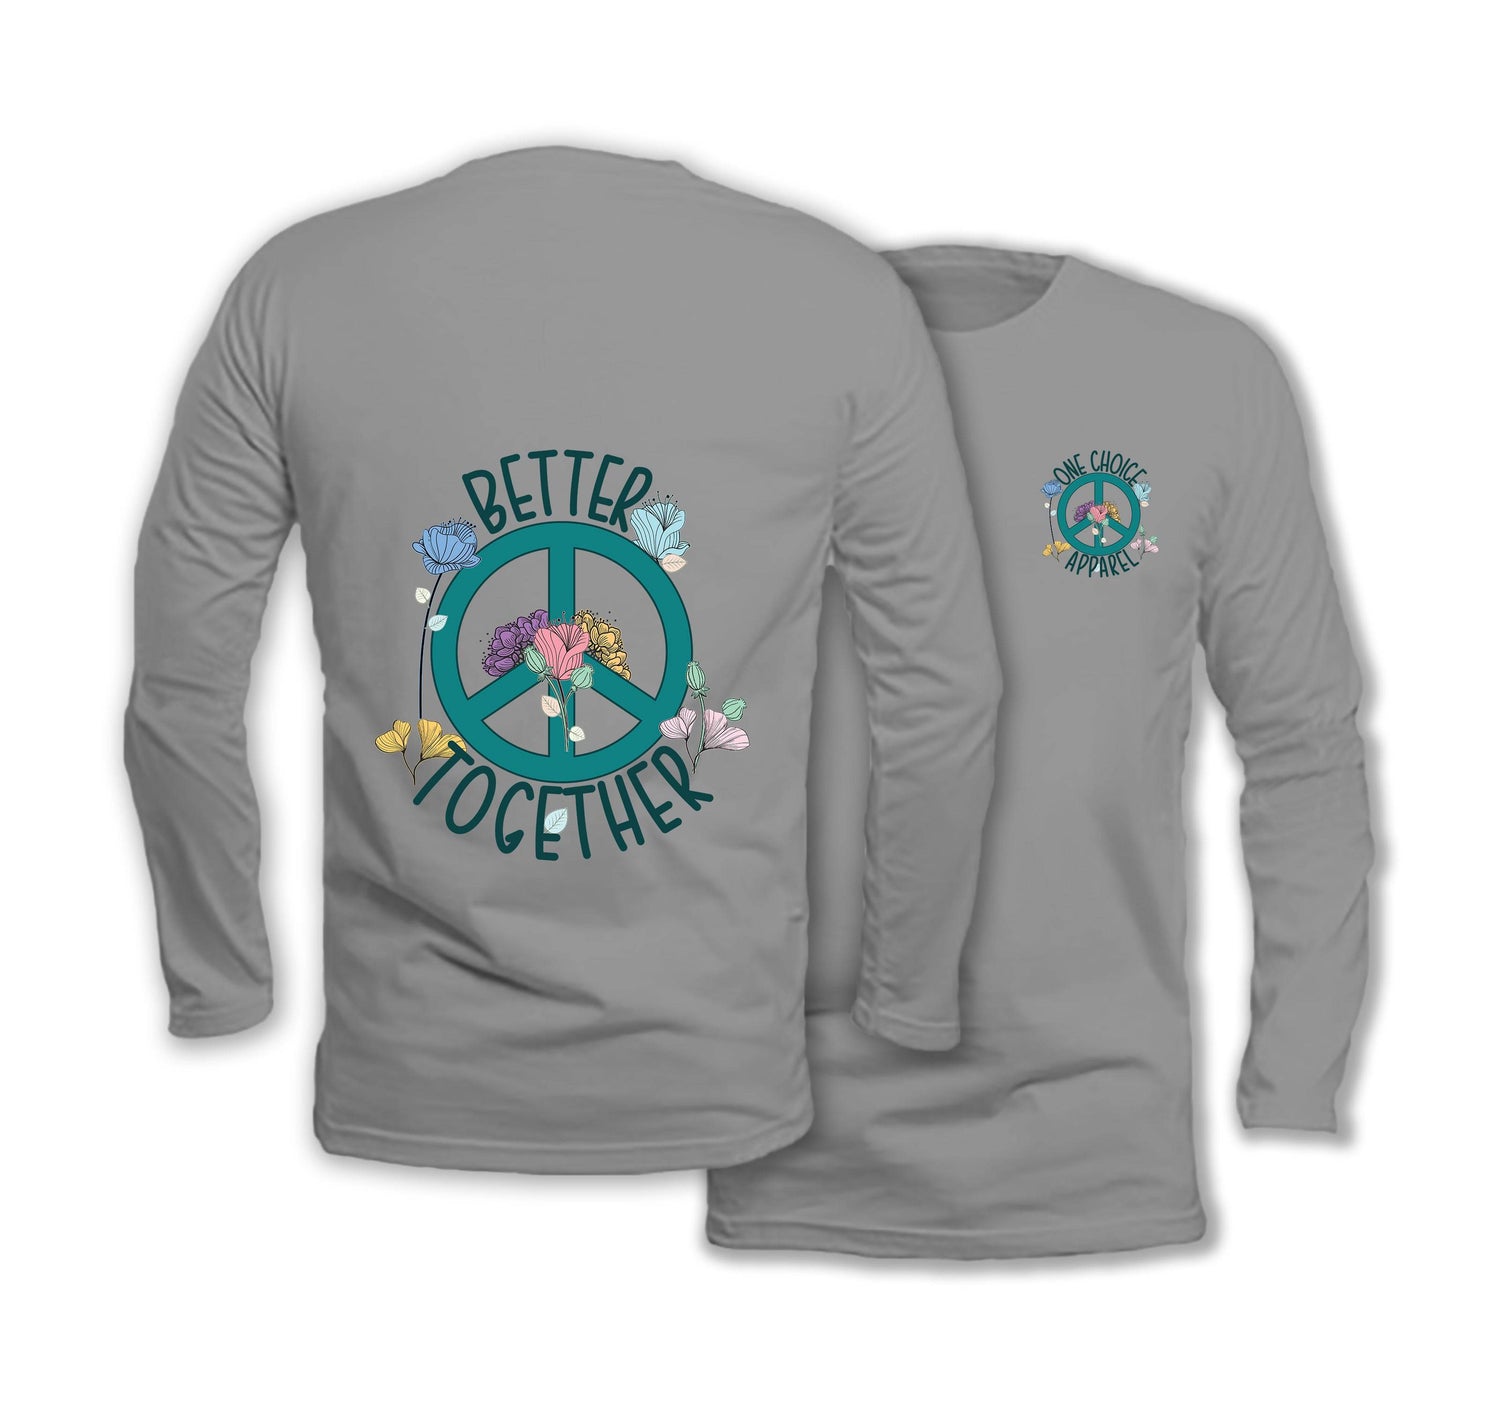 Better Together - Long Sleeve Organic Cotton T-Shirt - One Choice Apparel